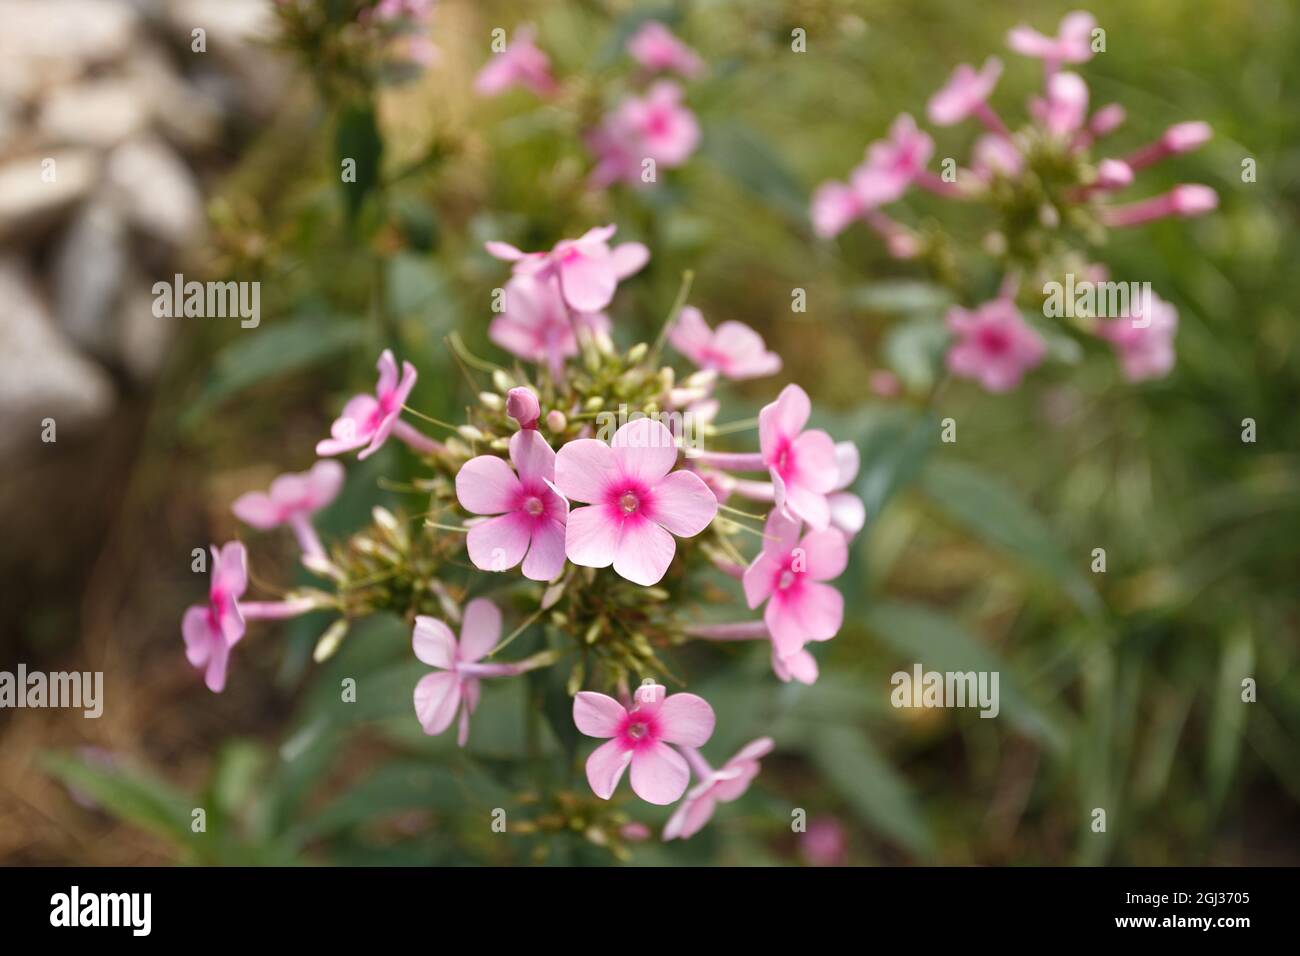 Pink phloxes blossoming in the summer garden Stock Photo